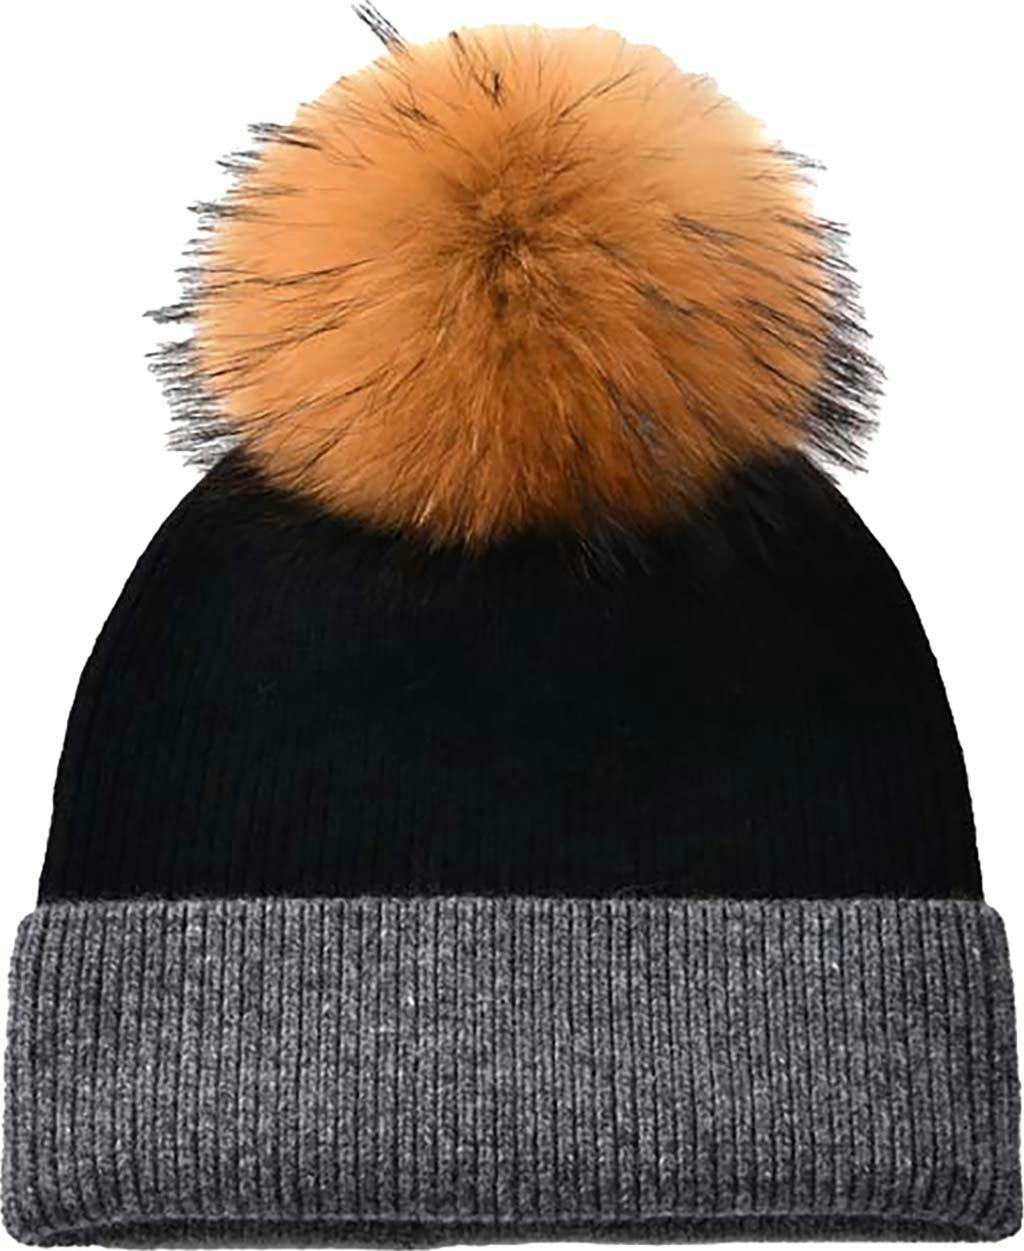 Product image for Sierra Beanie - Kids